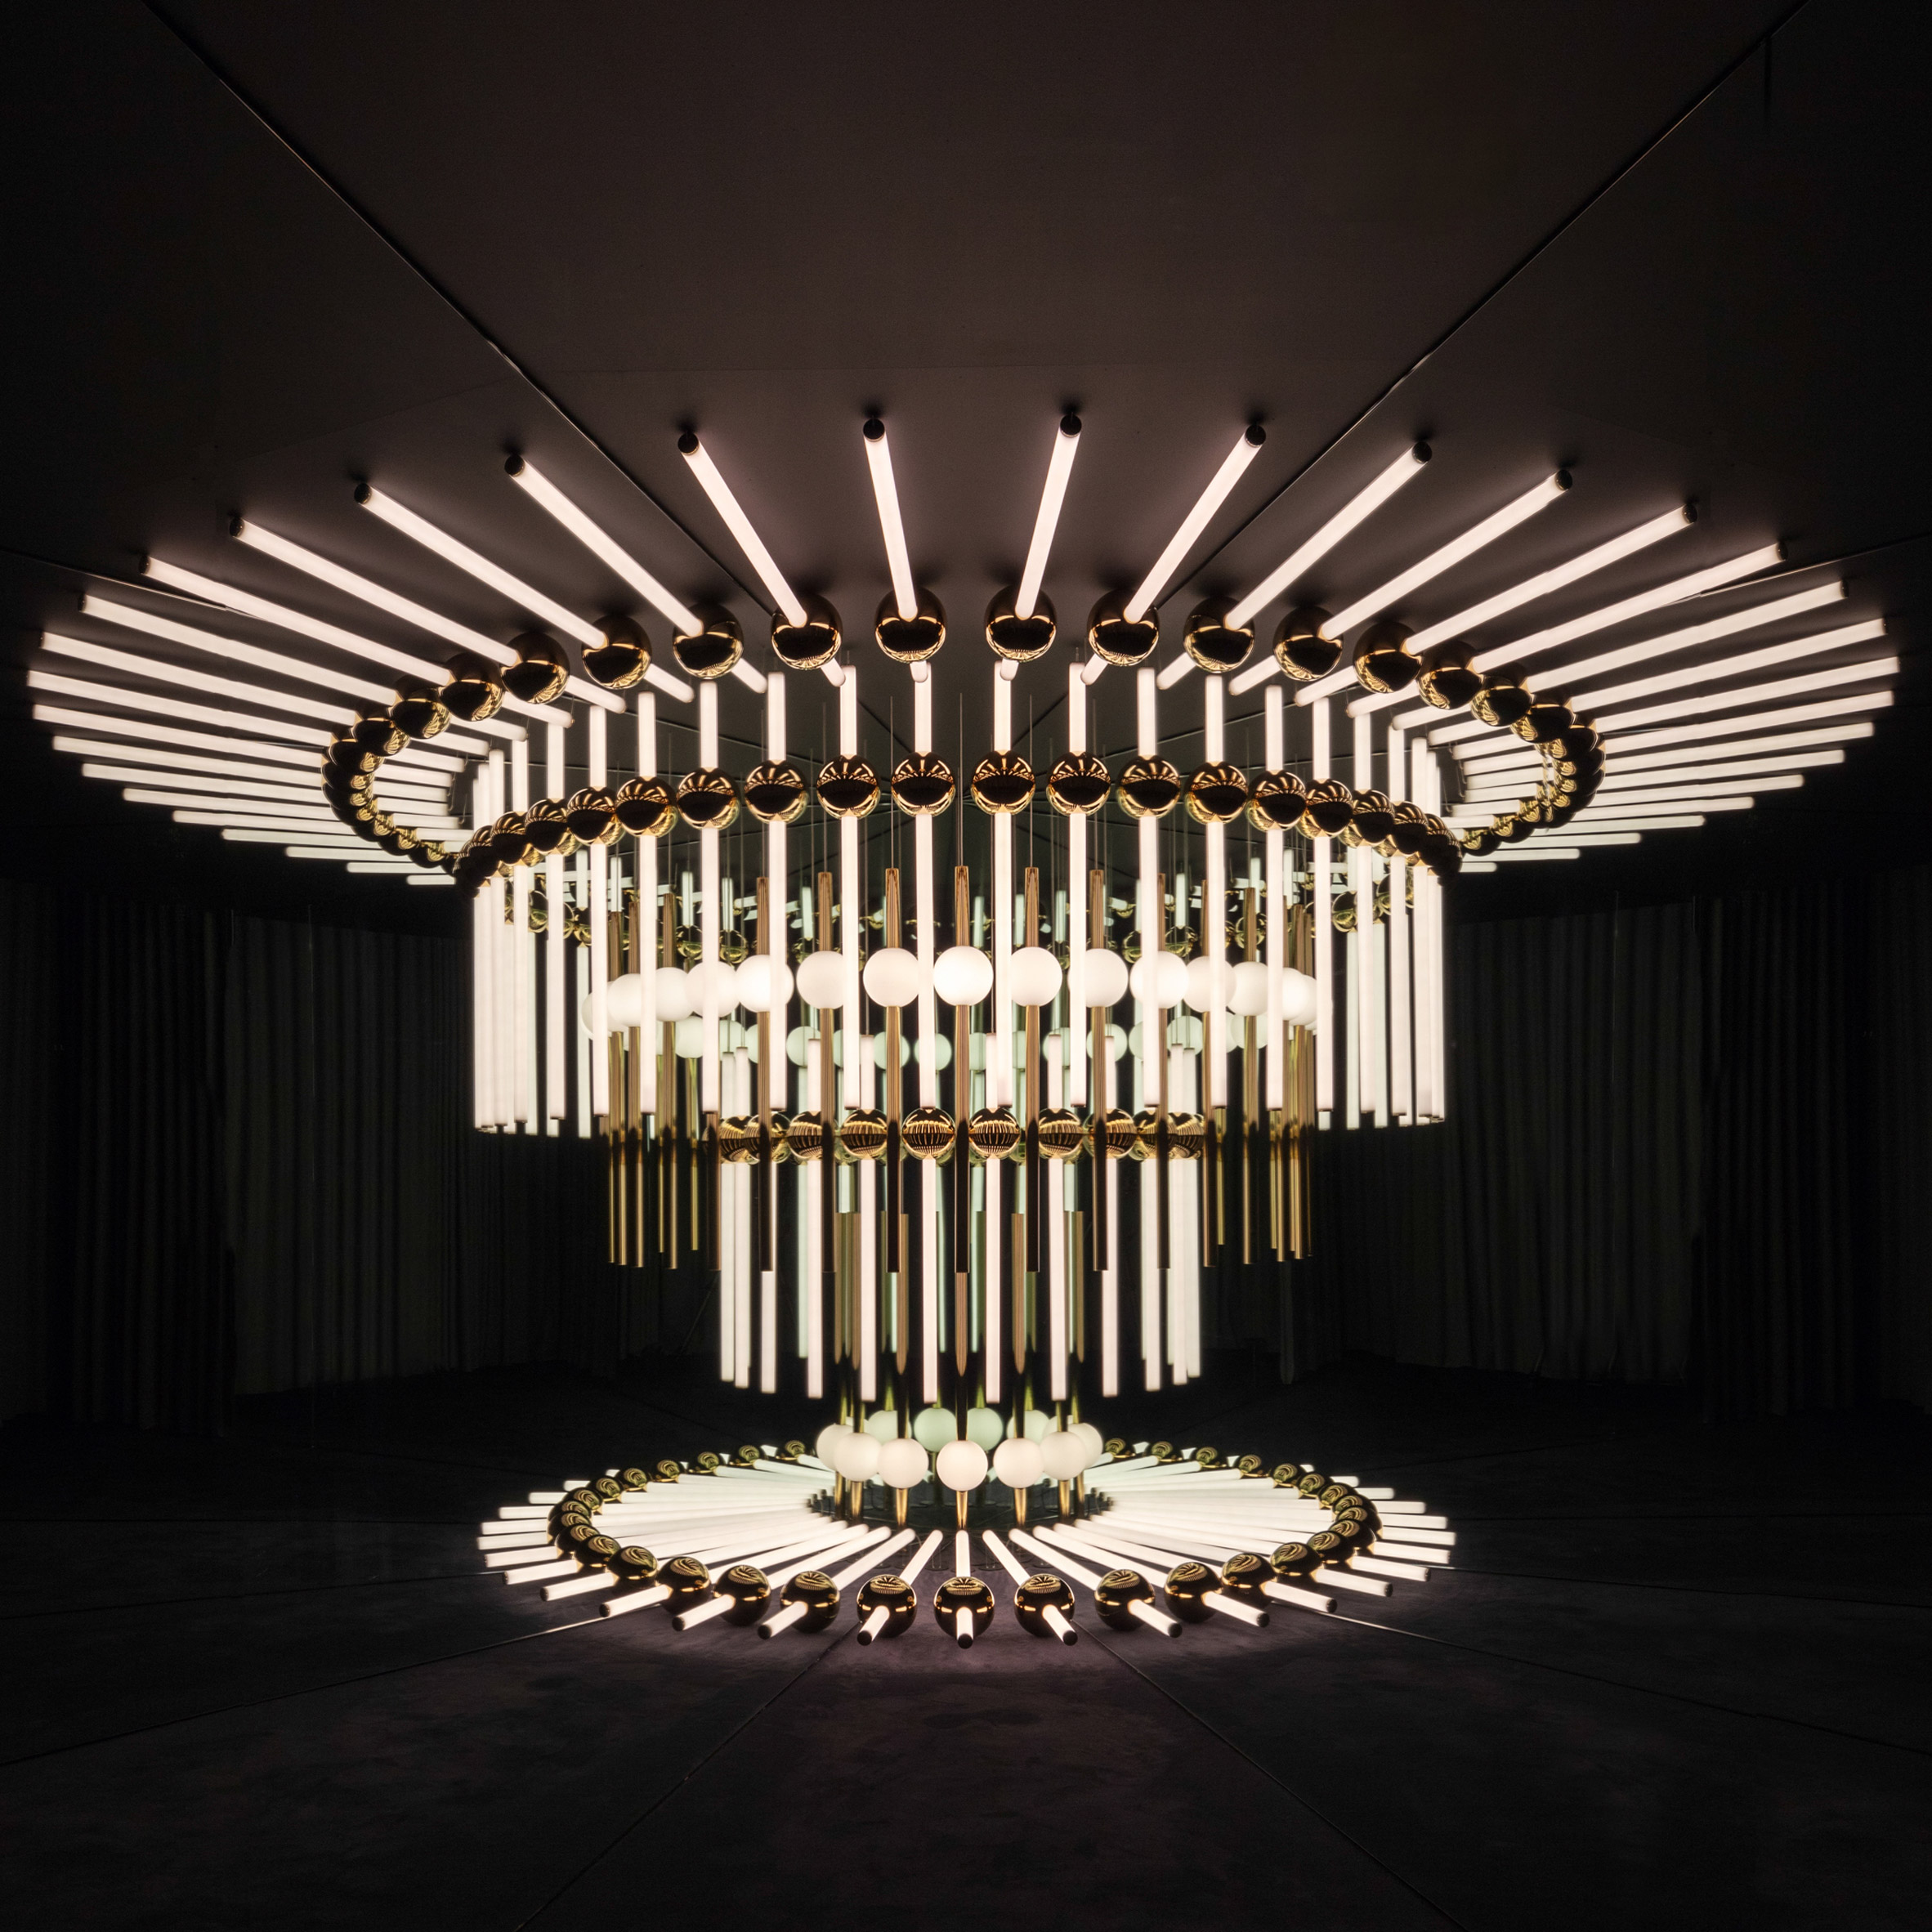 Lee Broom Kaleidoscopia shows products in a whole new light